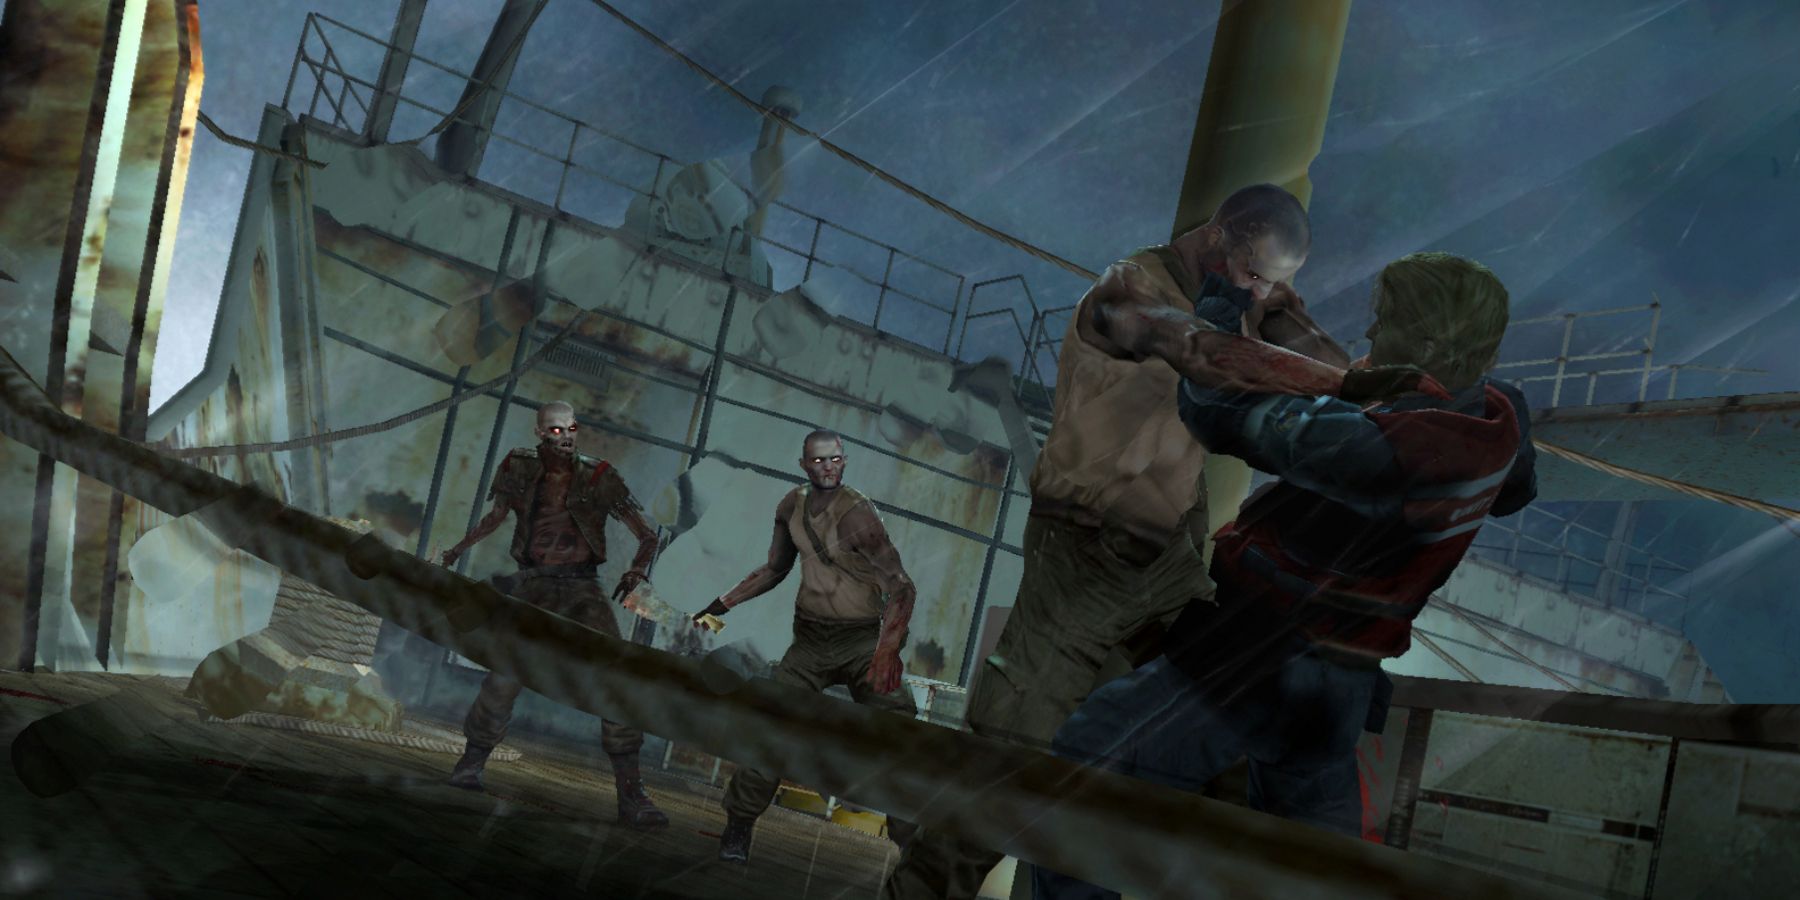 The player fighting zombies in Cold Fear (2005)